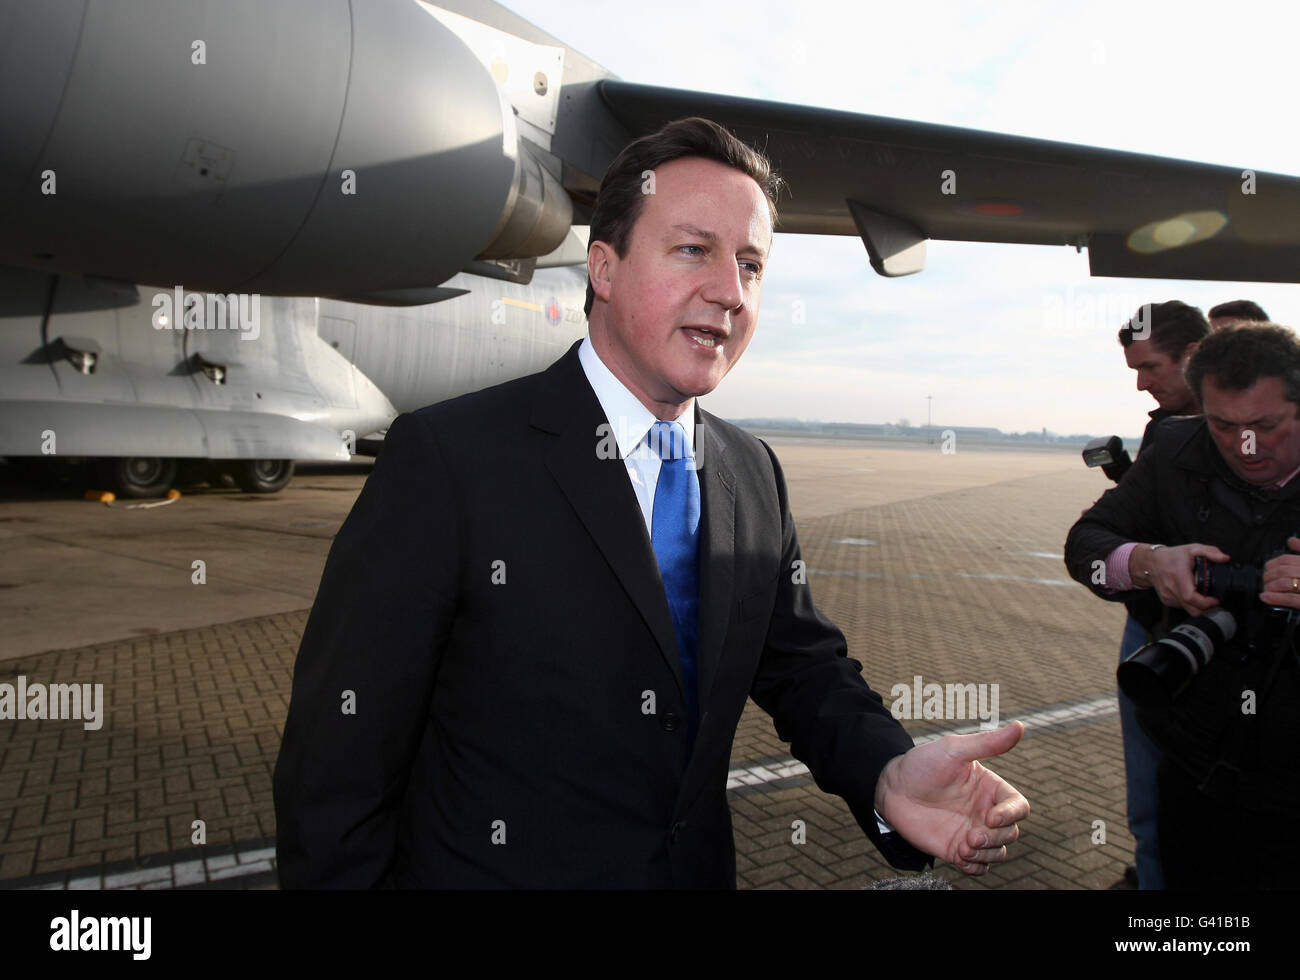 Prime Minister David Cameron speaks at RAF Brize Norton, as the RAF takes delivery of a new C-17 transport aircraft today. Stock Photo